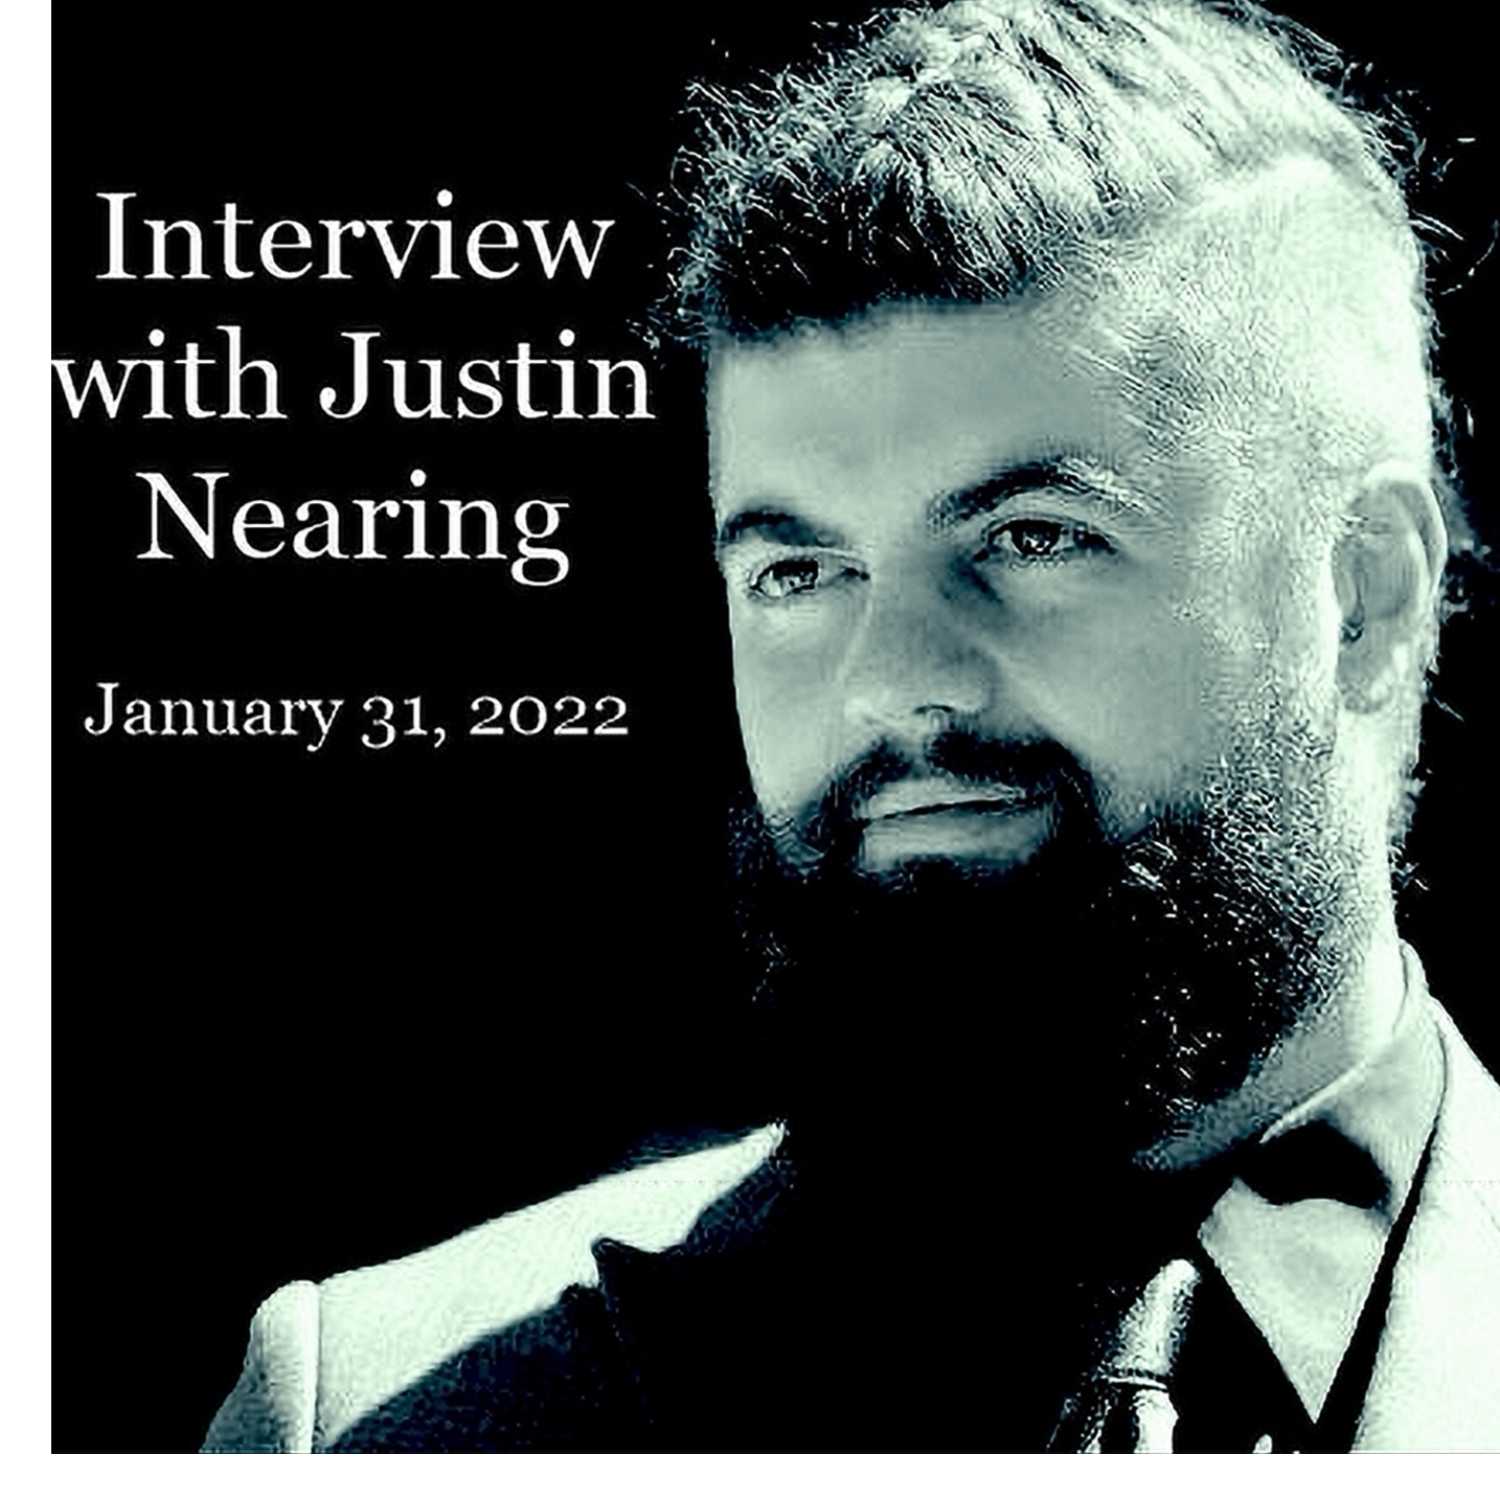 Interview with Justin Nearing January 31, 2022